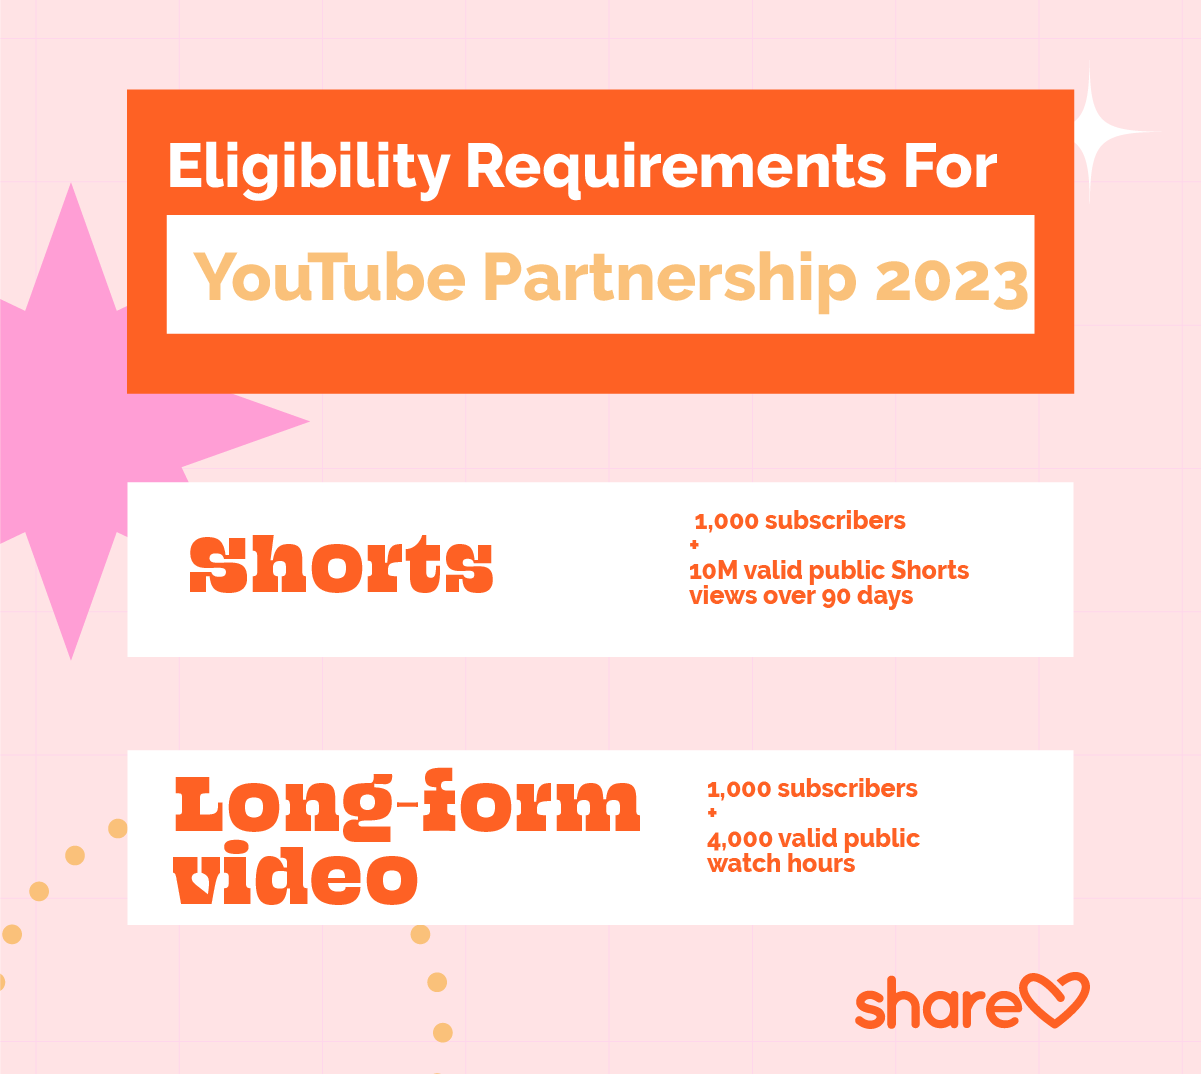 Eligibility Requirements For YouTube Partnership 2023